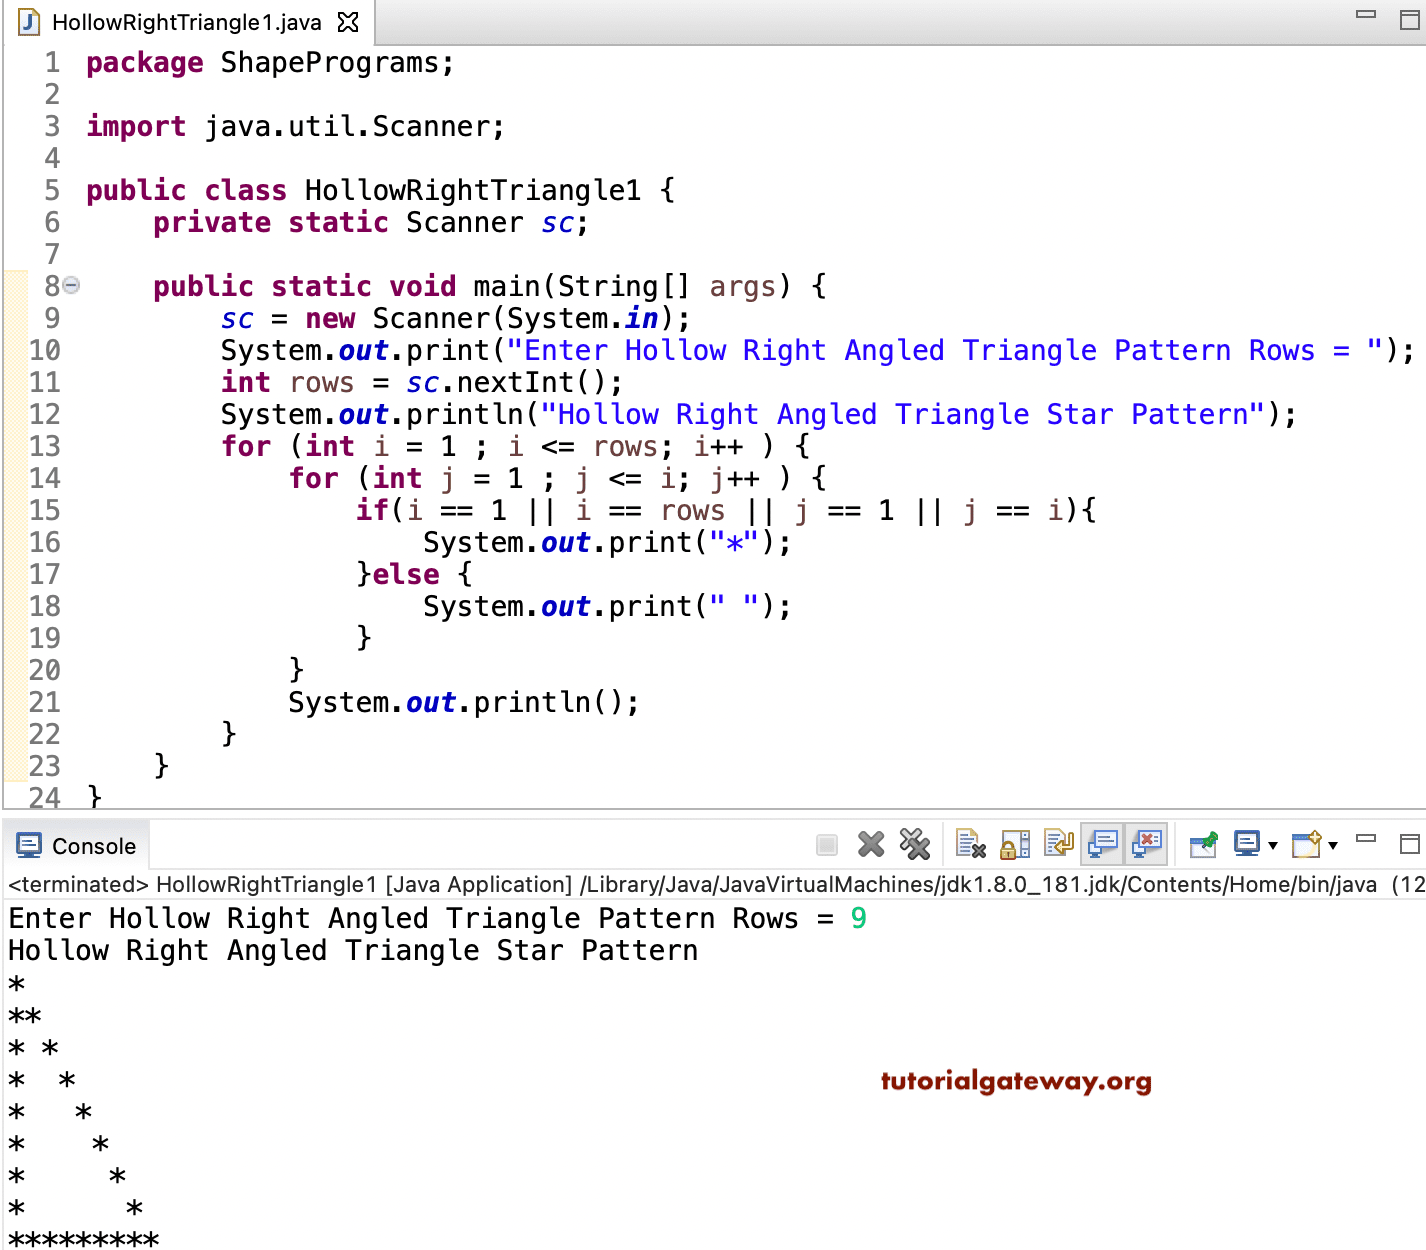 Java Program to Print Hollow Right Angled Triangle Star Pattern 1